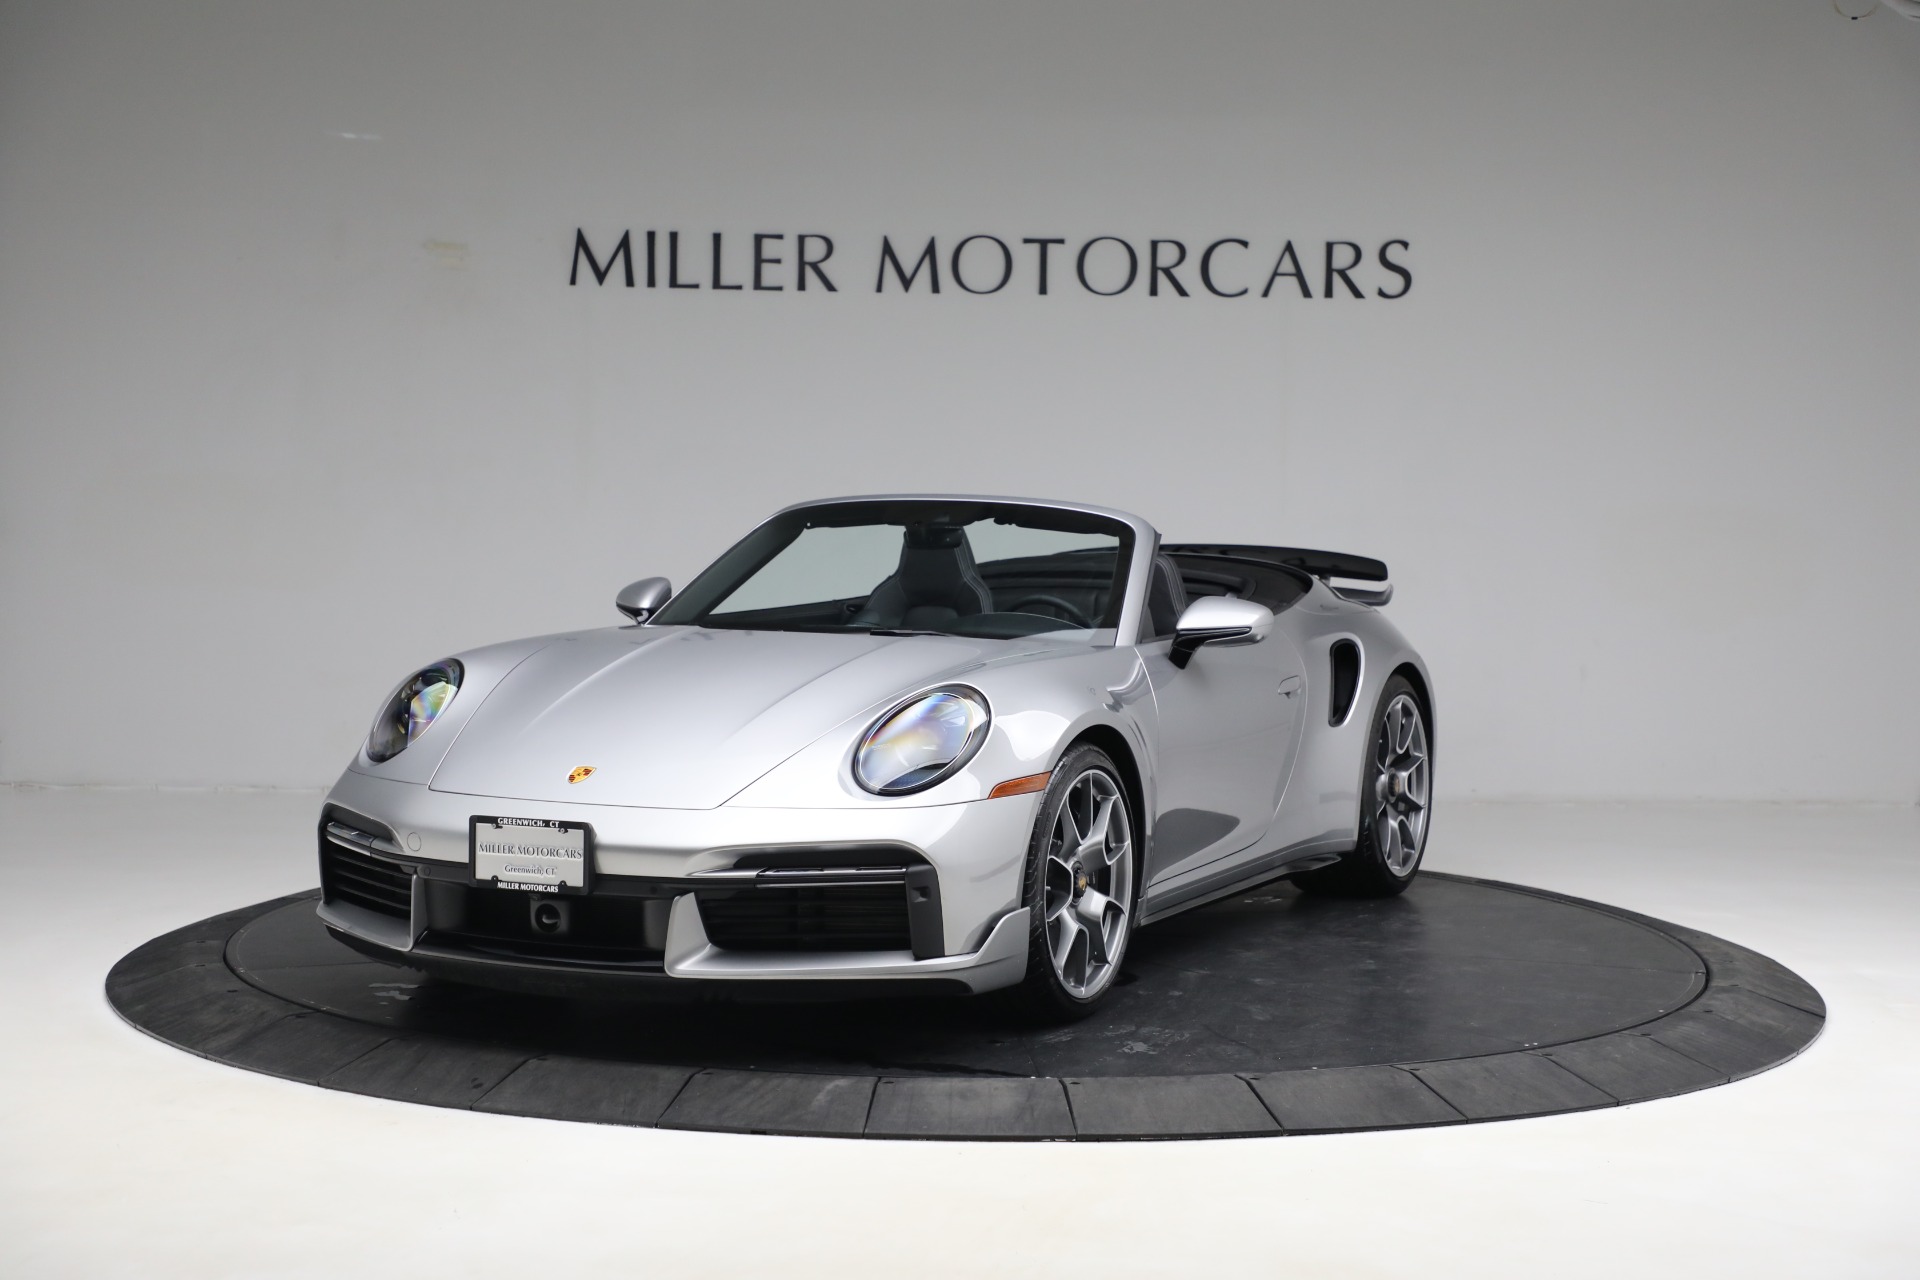 Used 2022 Porsche 911 Turbo S for sale Sold at Bentley Greenwich in Greenwich CT 06830 1